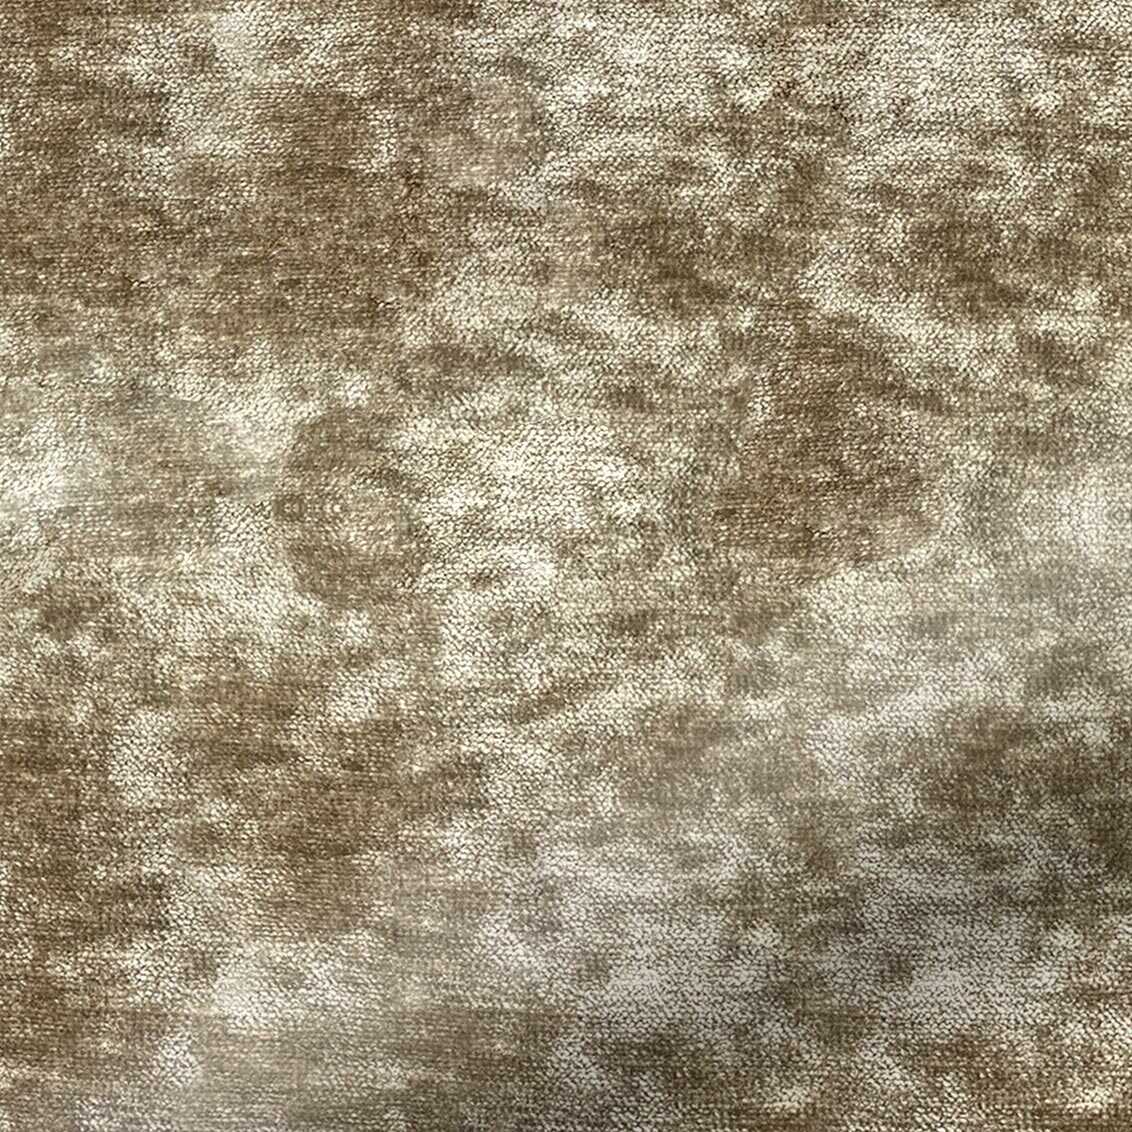 Brushed Knit Earth